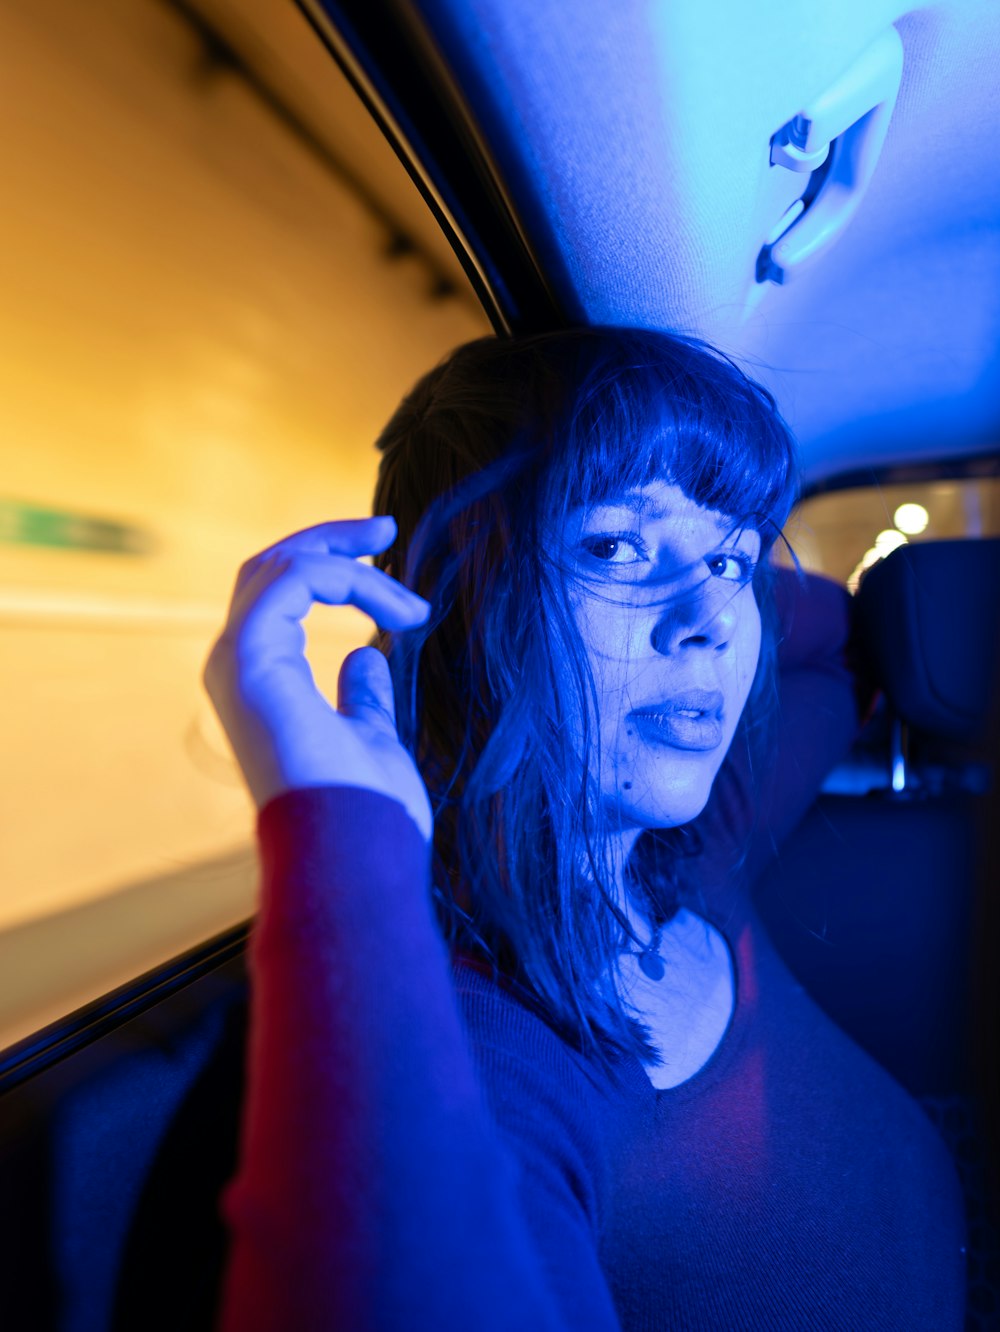 a woman in a car holding a cell phone to her ear